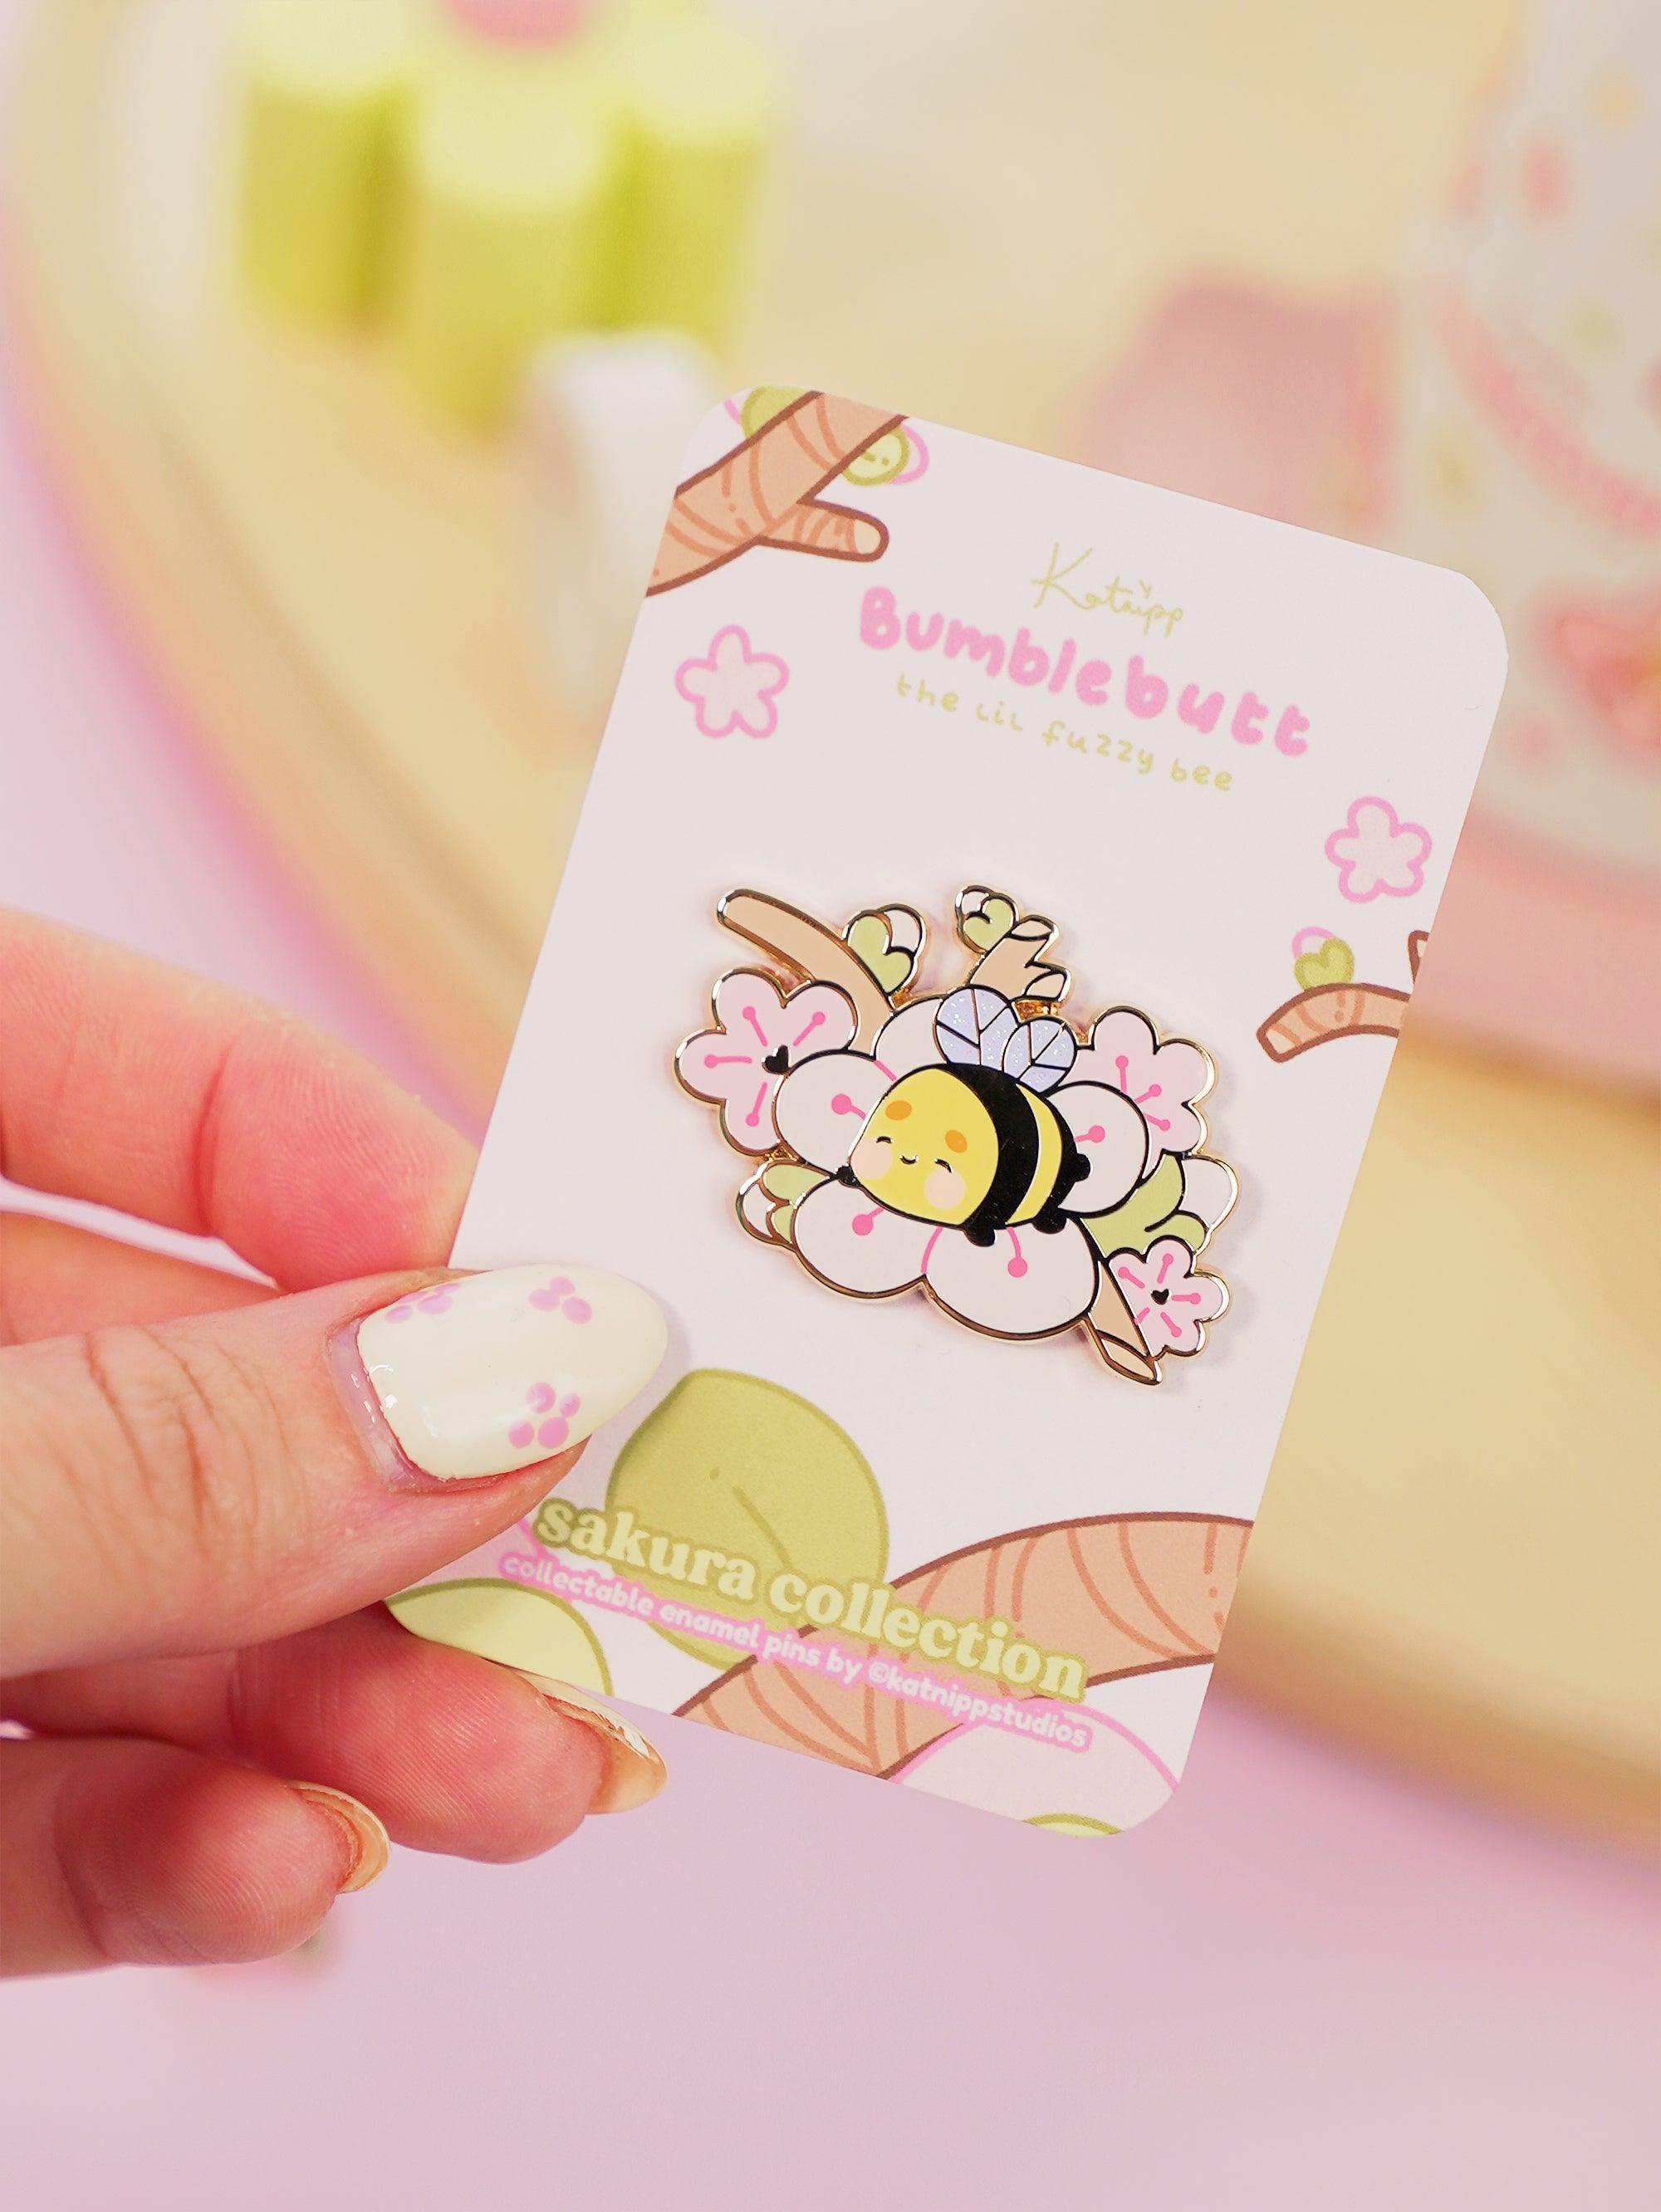 Enamel pin featuring Bumblebutt resting on a blossom branch, part of the Sakura Collection from Katnipp.